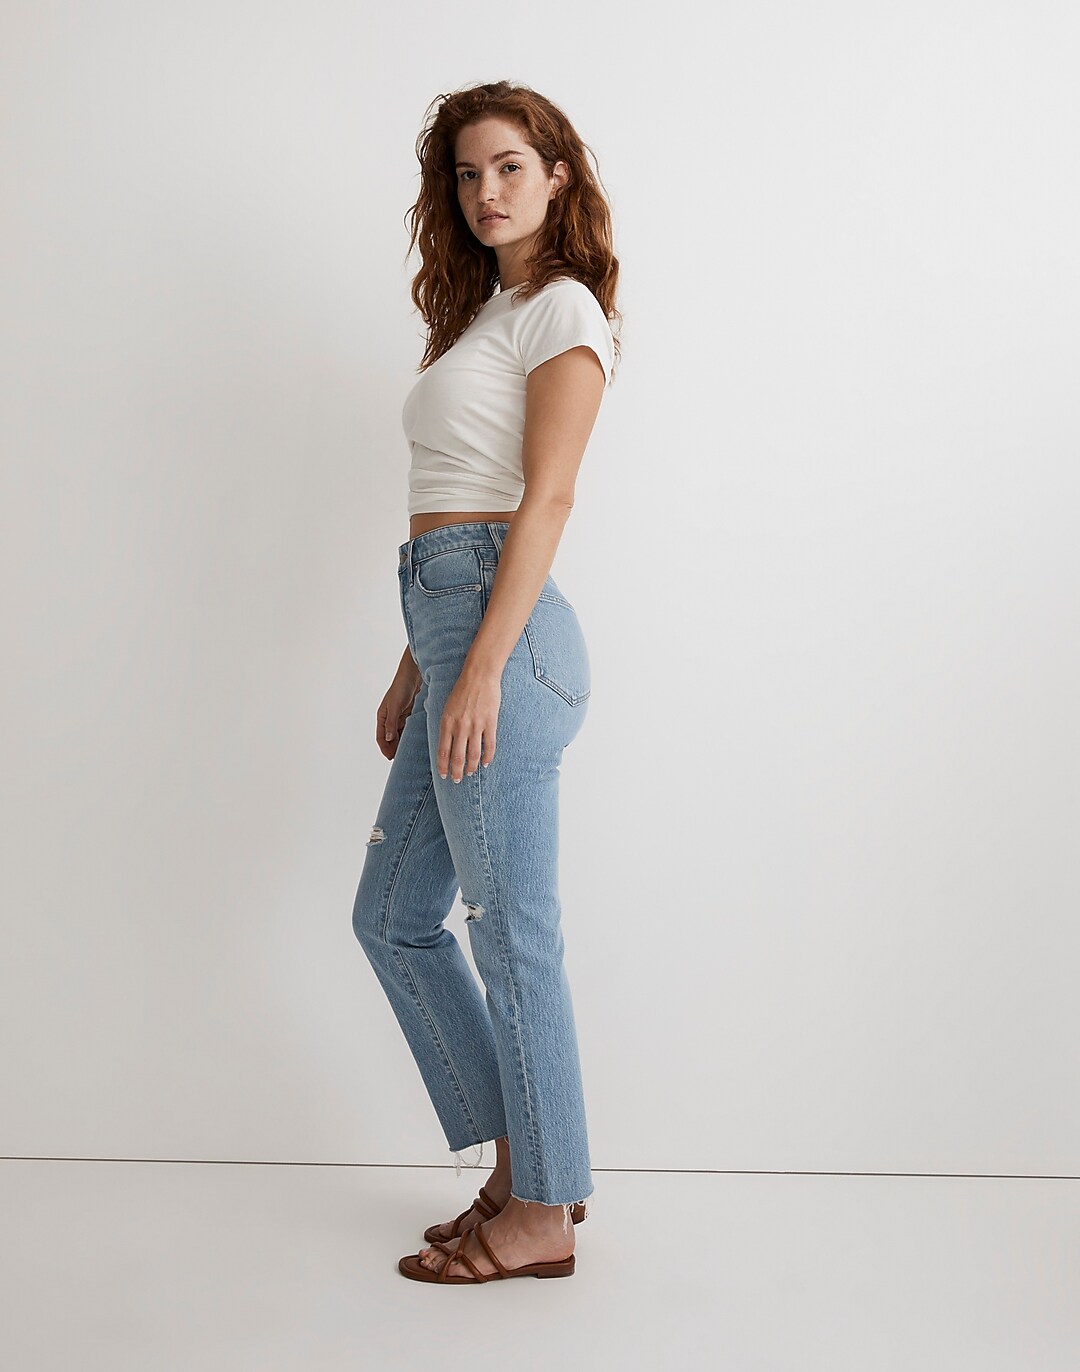 Madewell Girl Jean  Berryton Wash: Distressed Edition – The Curvy